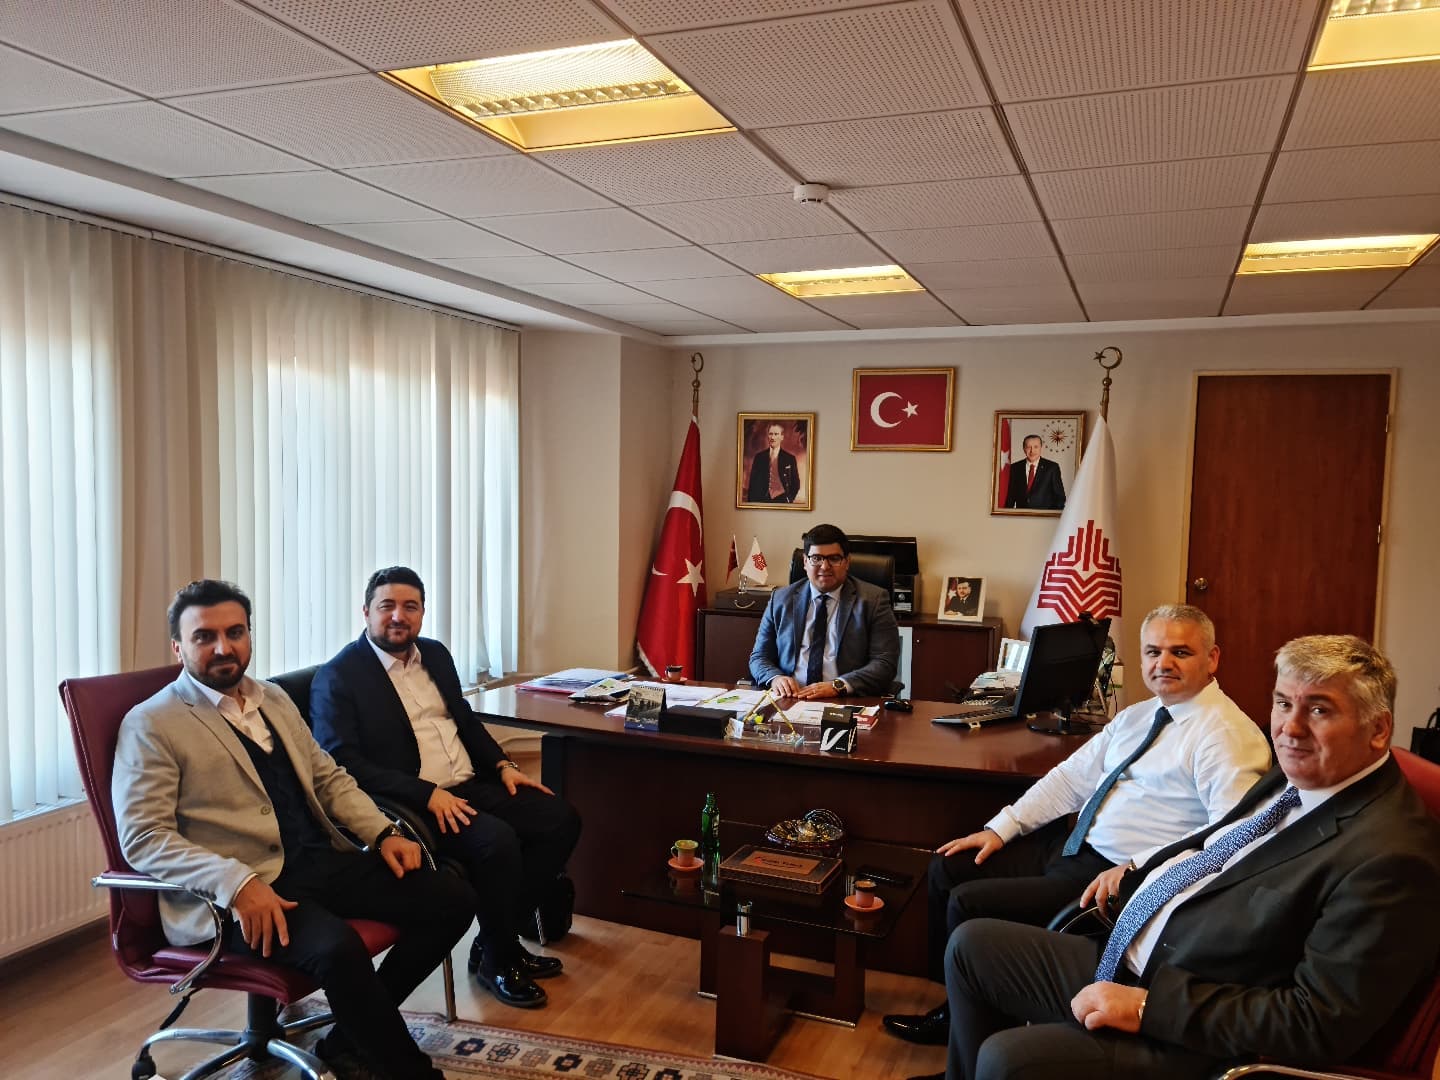 Our Regional Director of Foundations, Mr. Visit to Gökhan BAHCECIK